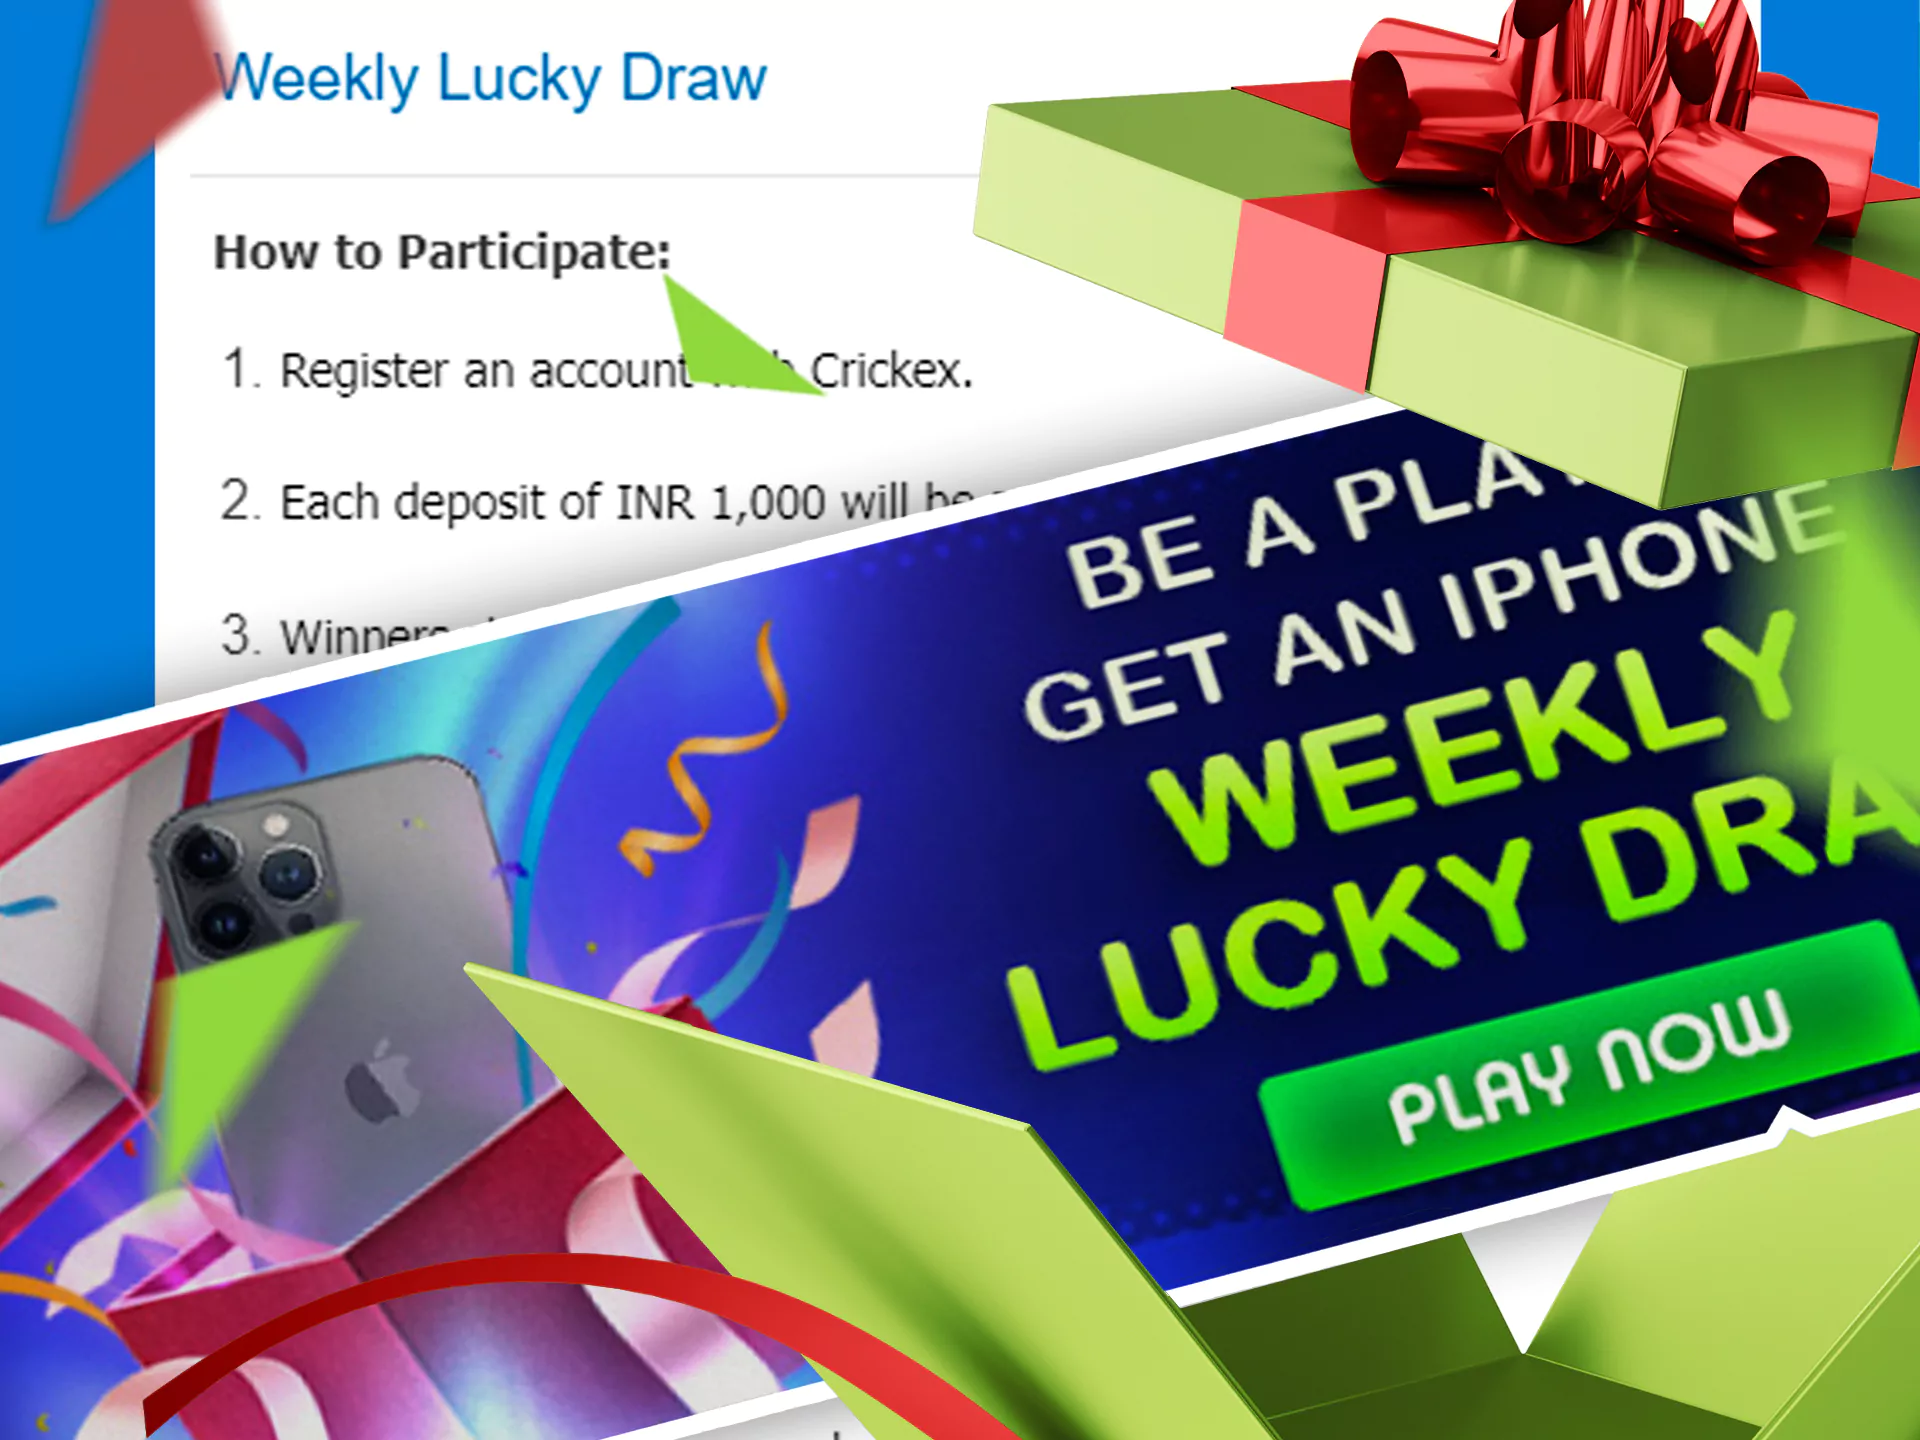 Every week, you can take part in a Weekly Lucky Draw promotion.